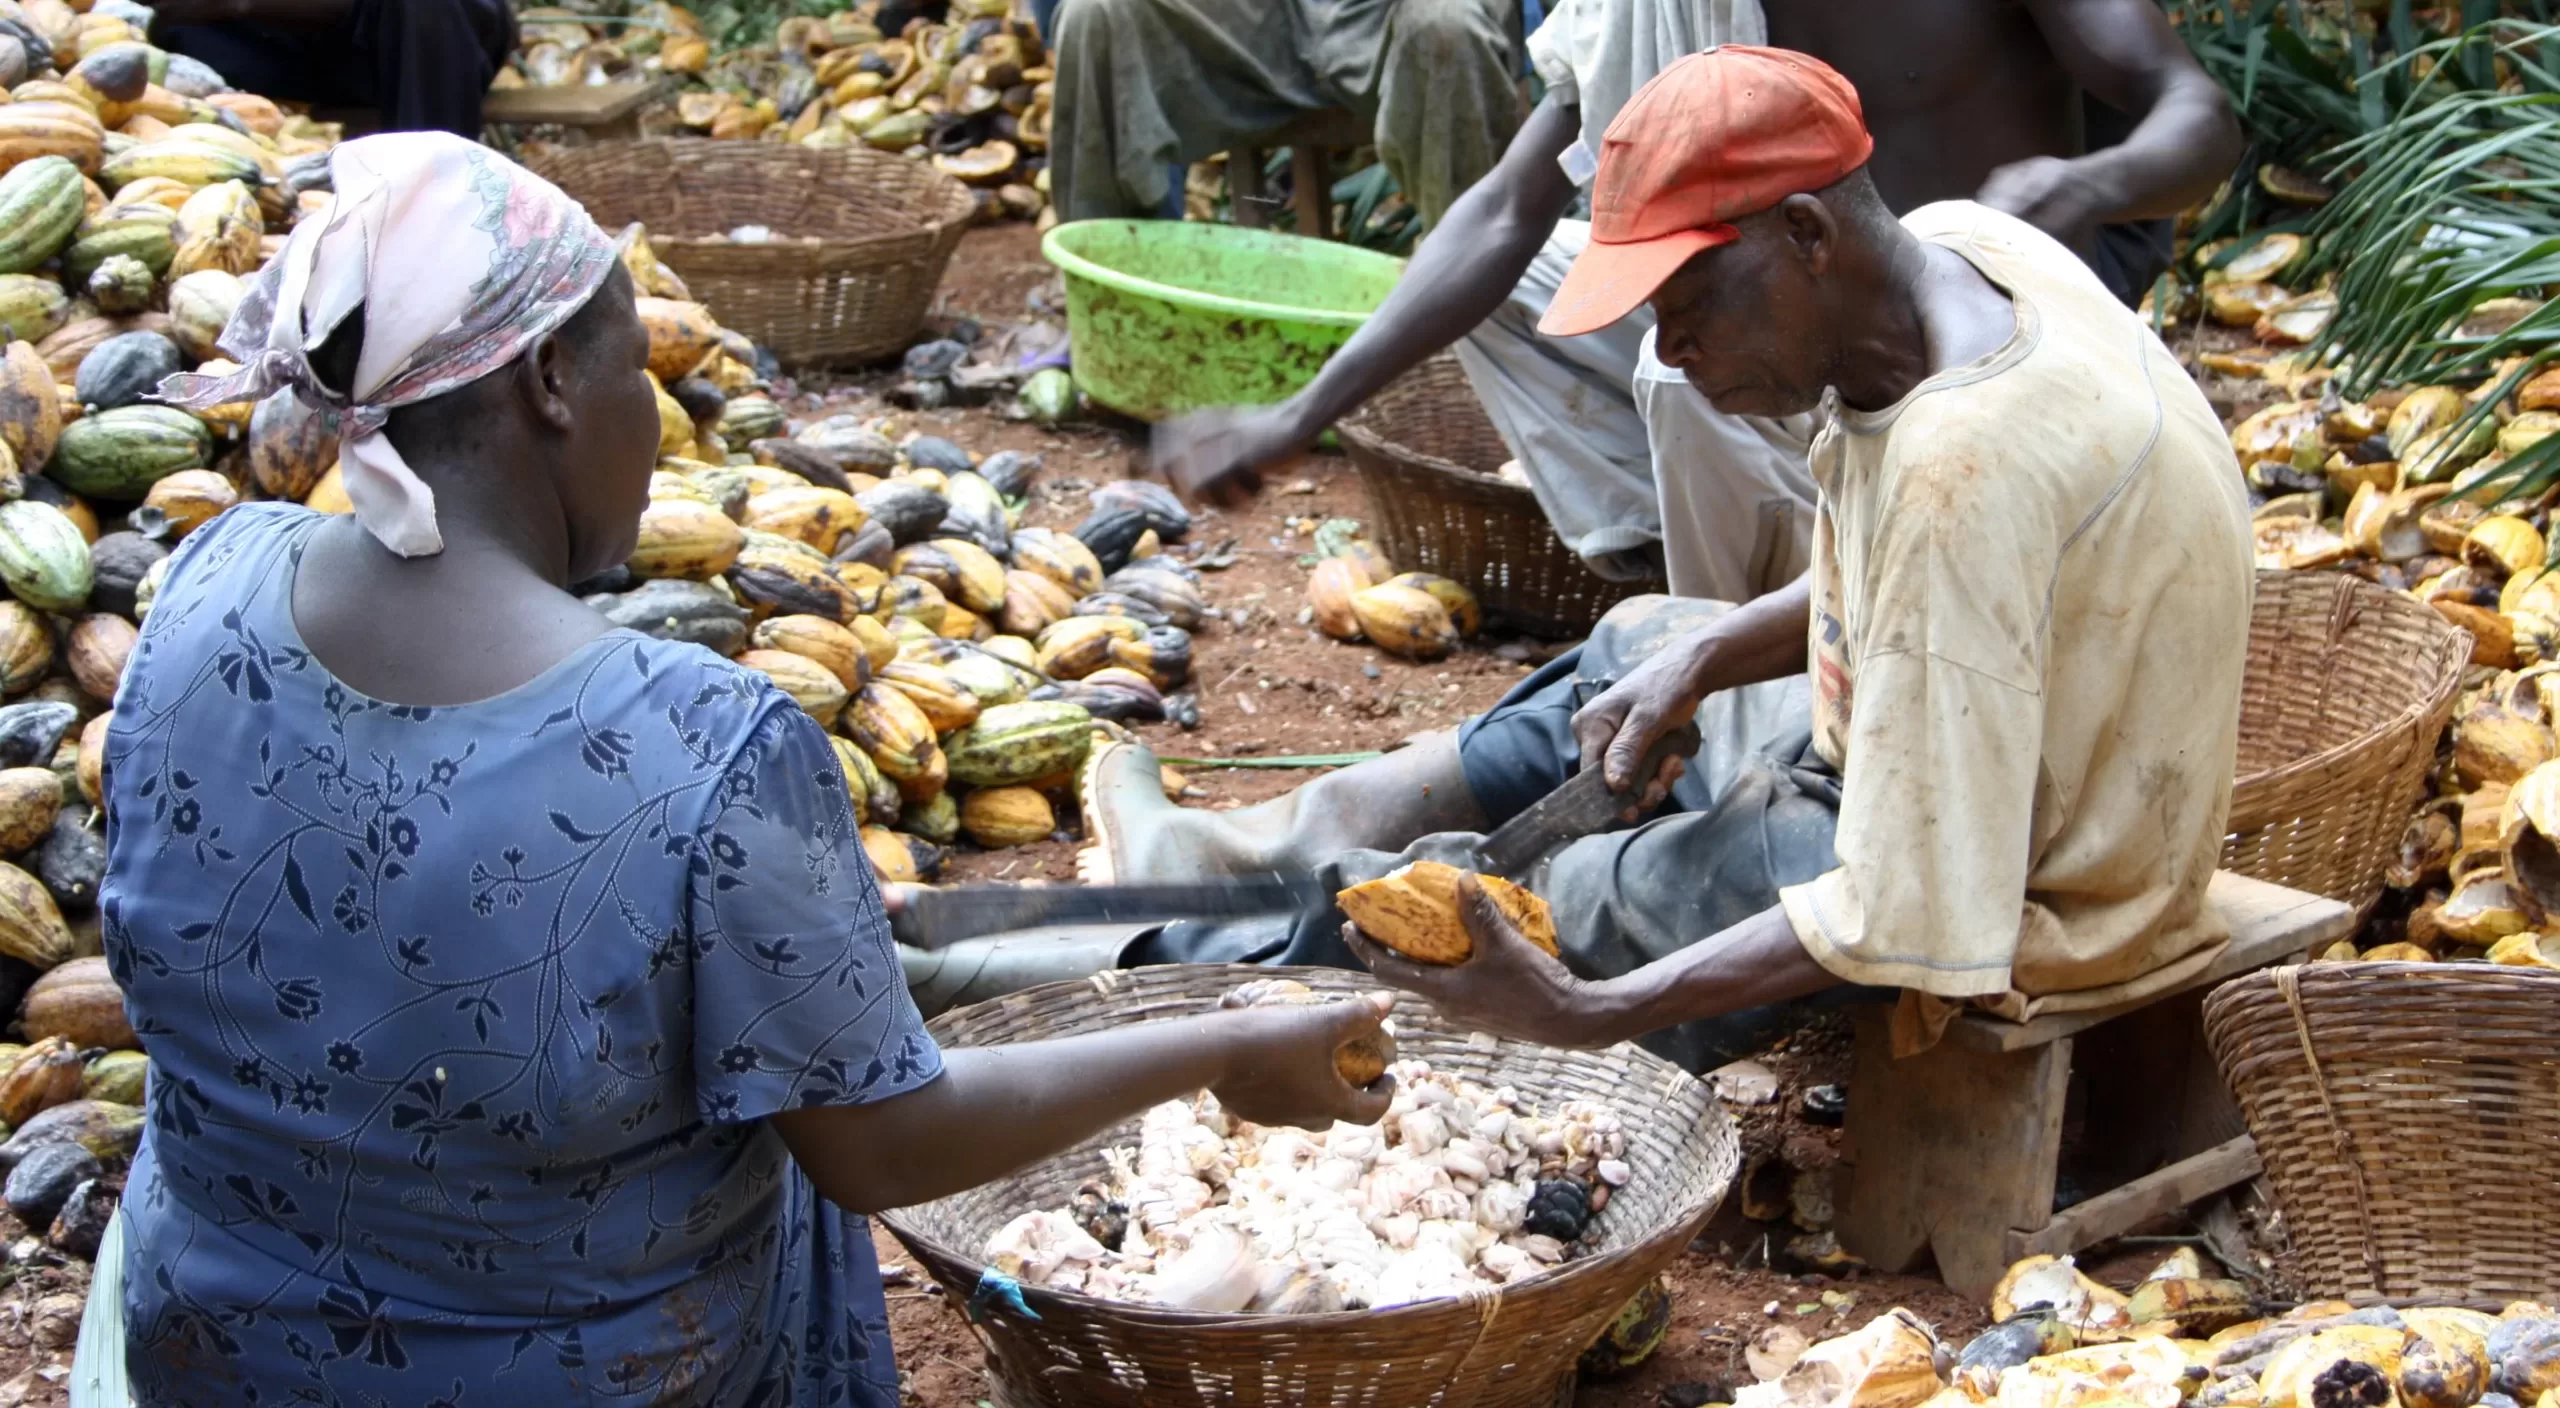 Ghana's Illegal Galamsey Gold Mining Affecting Cocoa Farmers, Chocolate  Supply